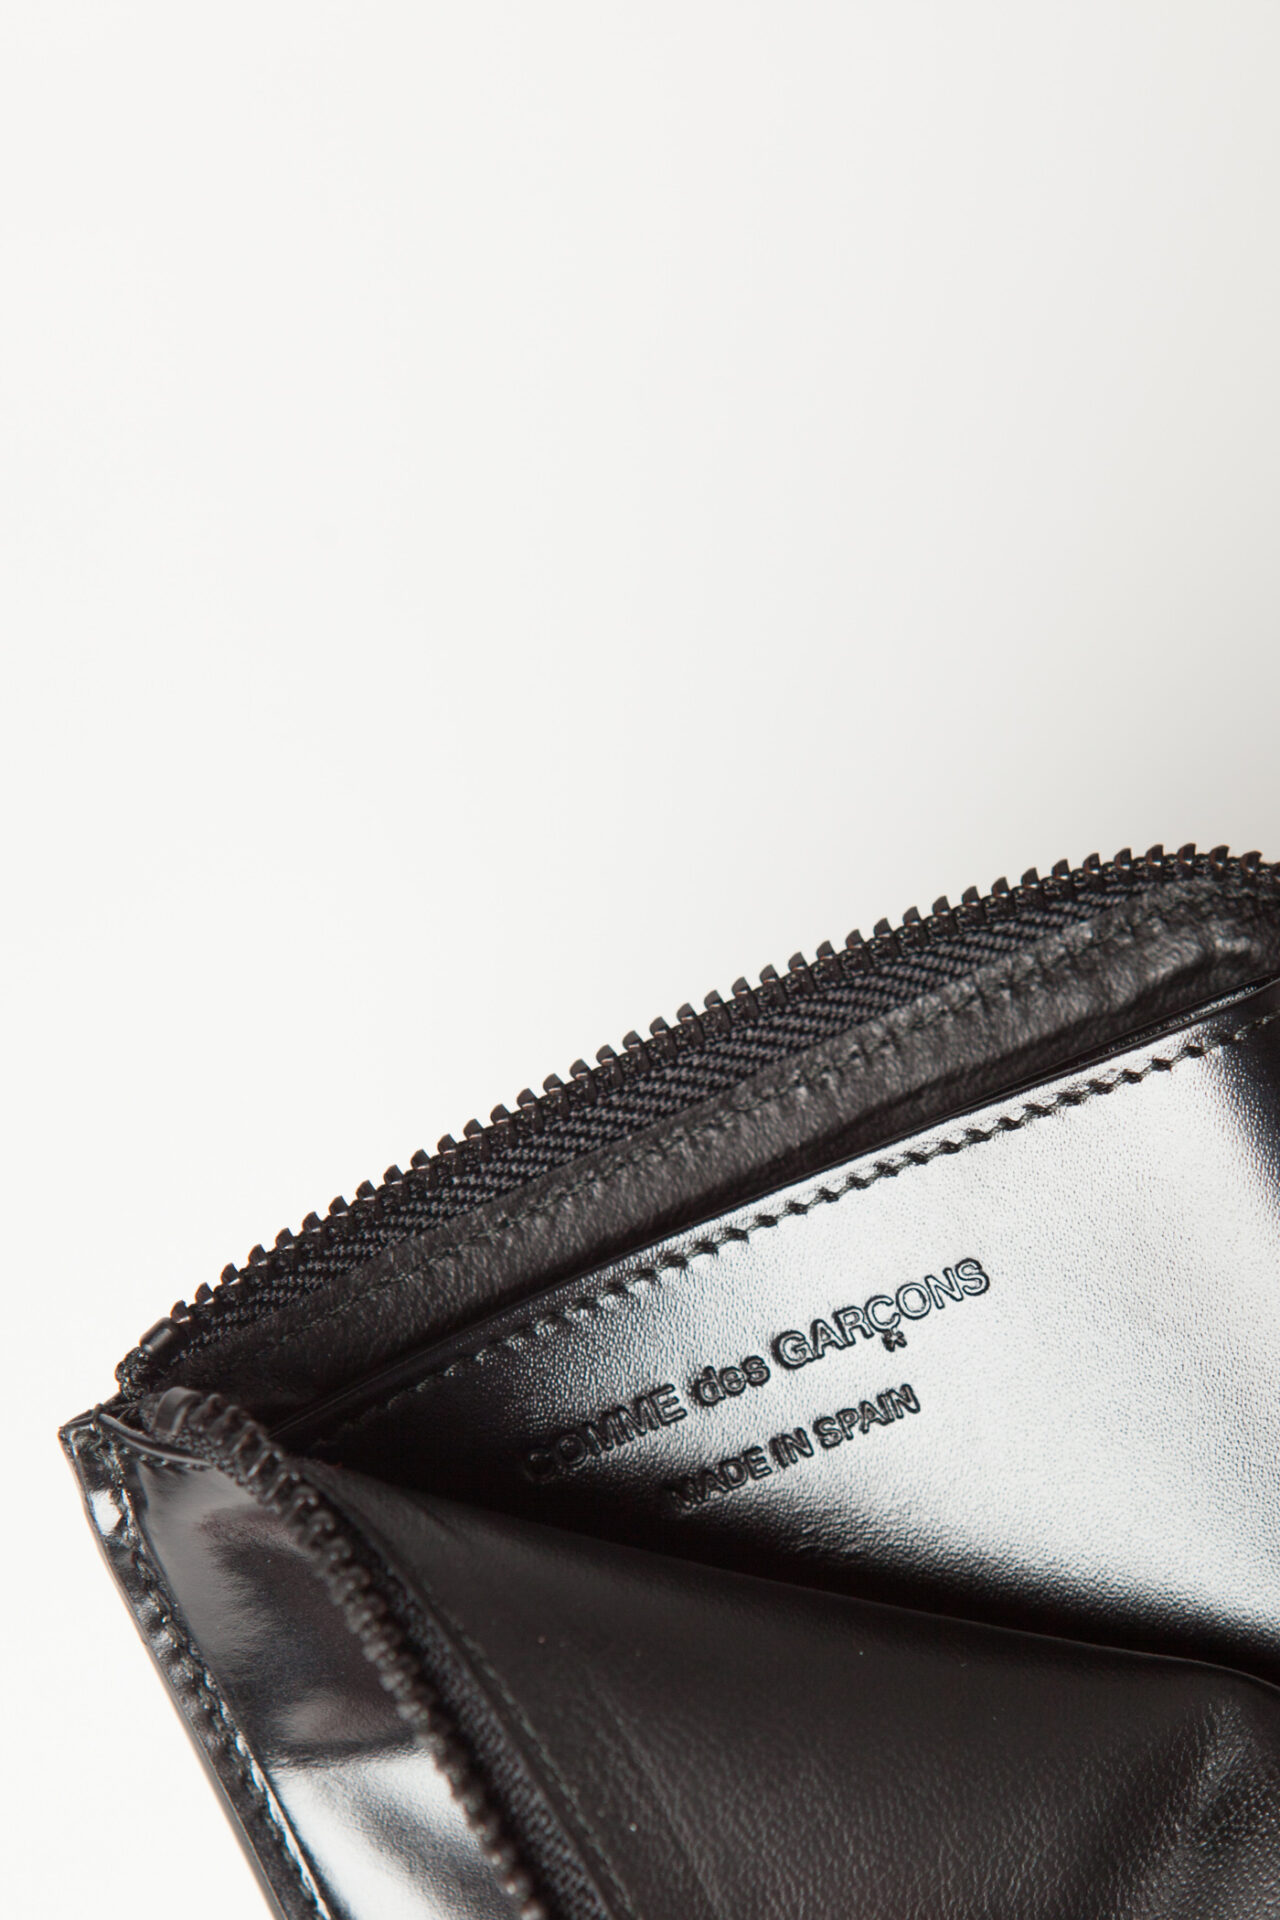 Comme Des Garcons Wallet Black wallet SA3100 from the Very Black line  Schwittenberg